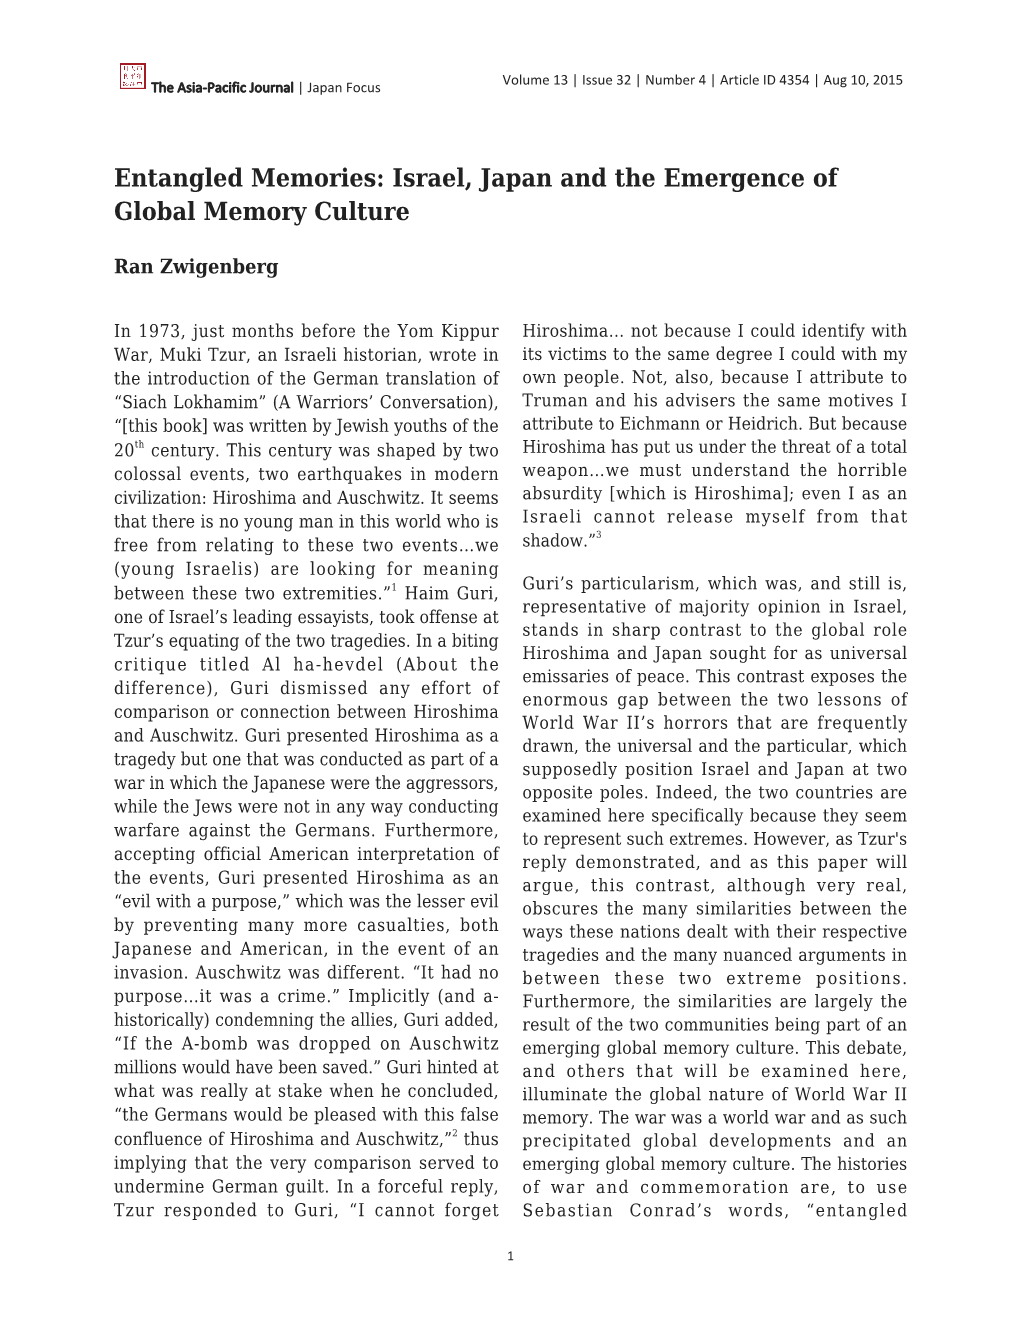 Israel, Japan and the Emergence of Global Memory Culture